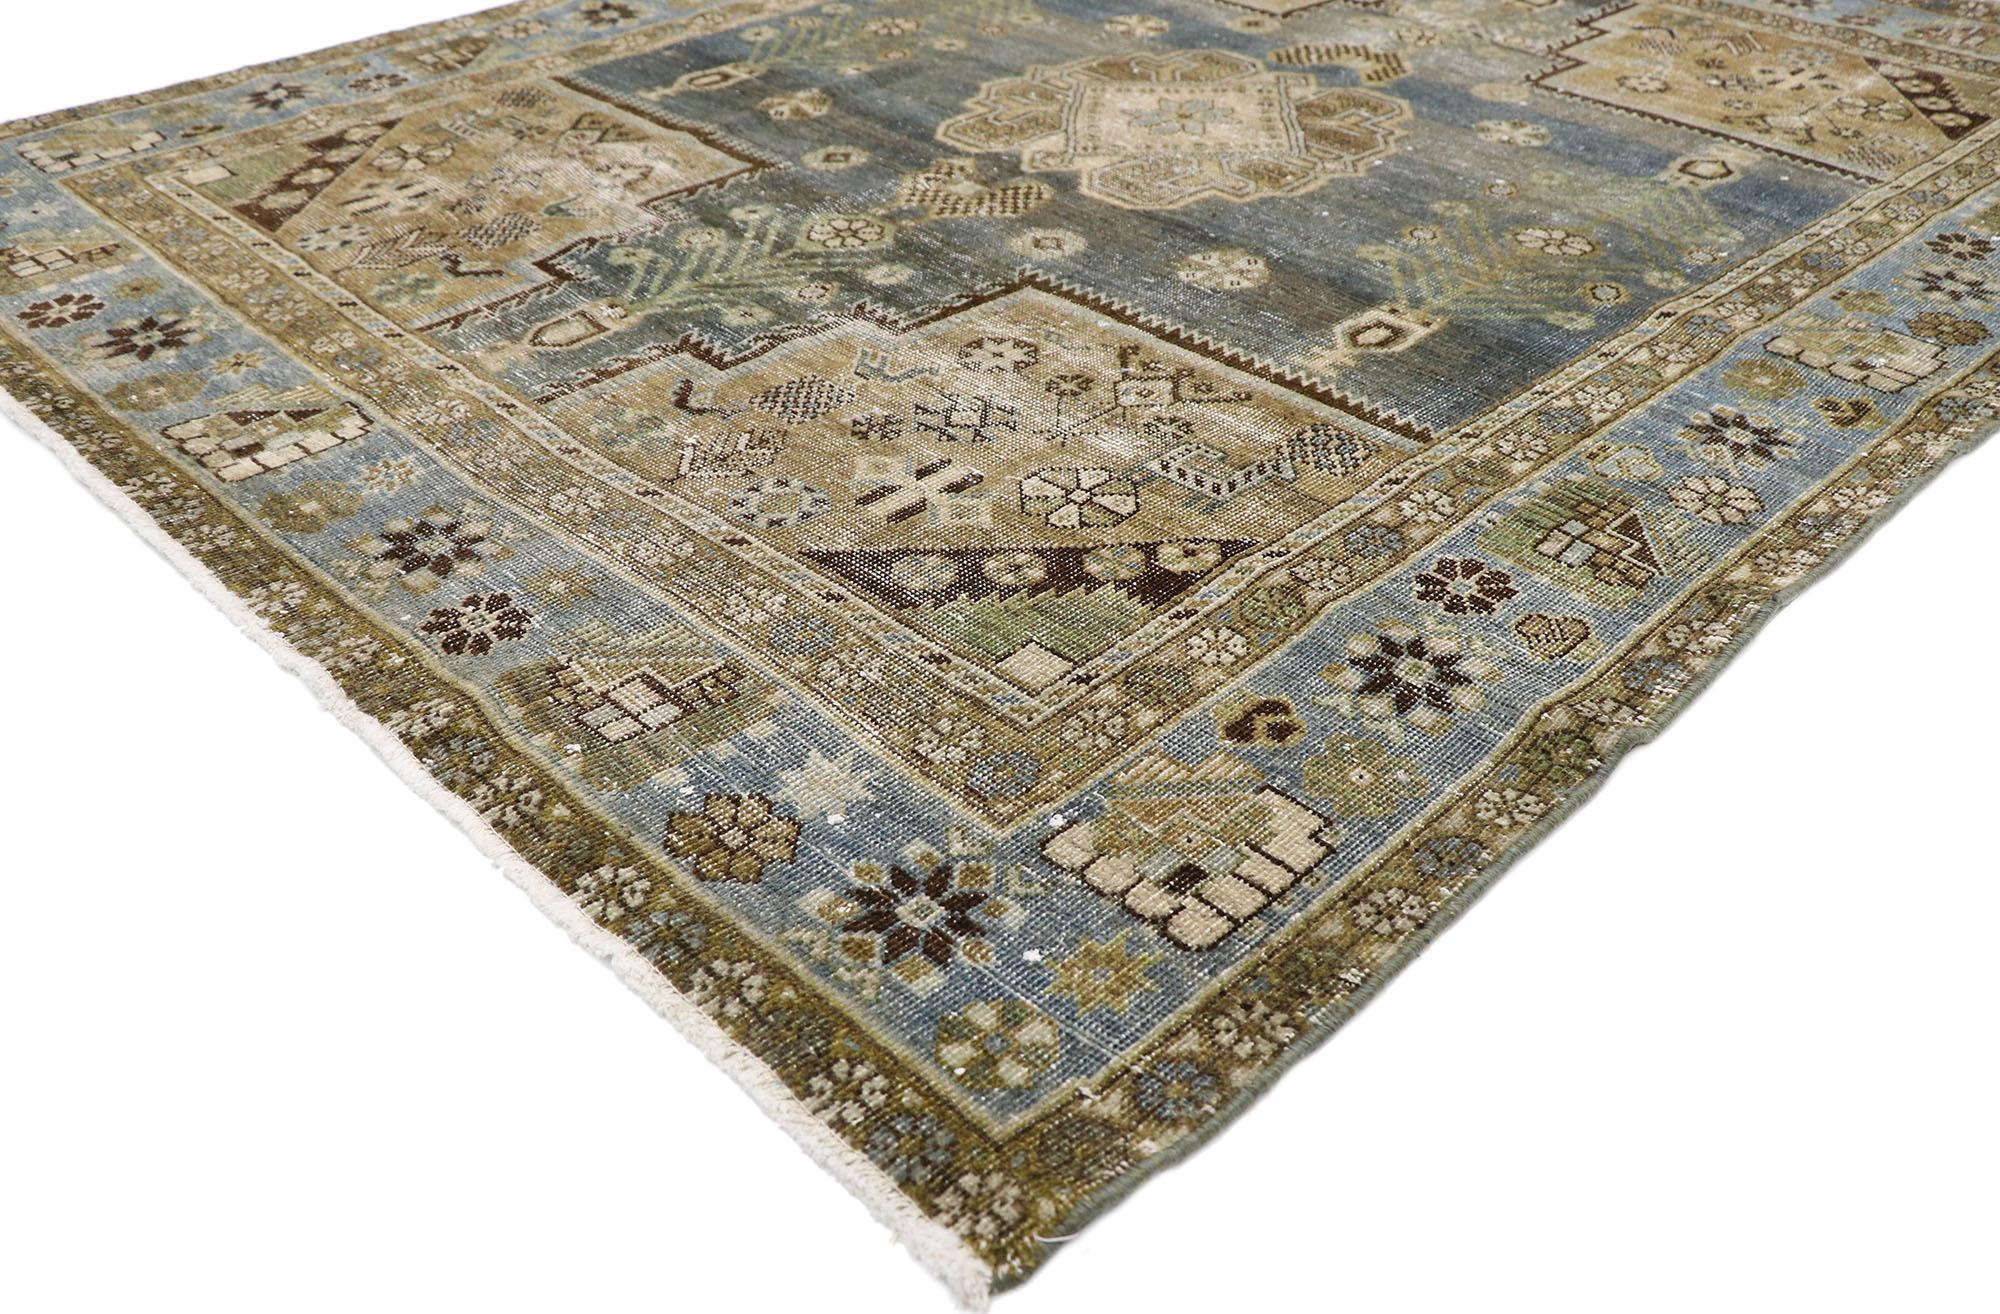 60922 antique Persian Afshar rug with Modern Tribal style 05'02 x 06'06. Balancing traditional sensibility and tribal design elements with nostalgic charm, this hand knotted wool antique Persian Afshar rug can beautifully blend modern, traditional,